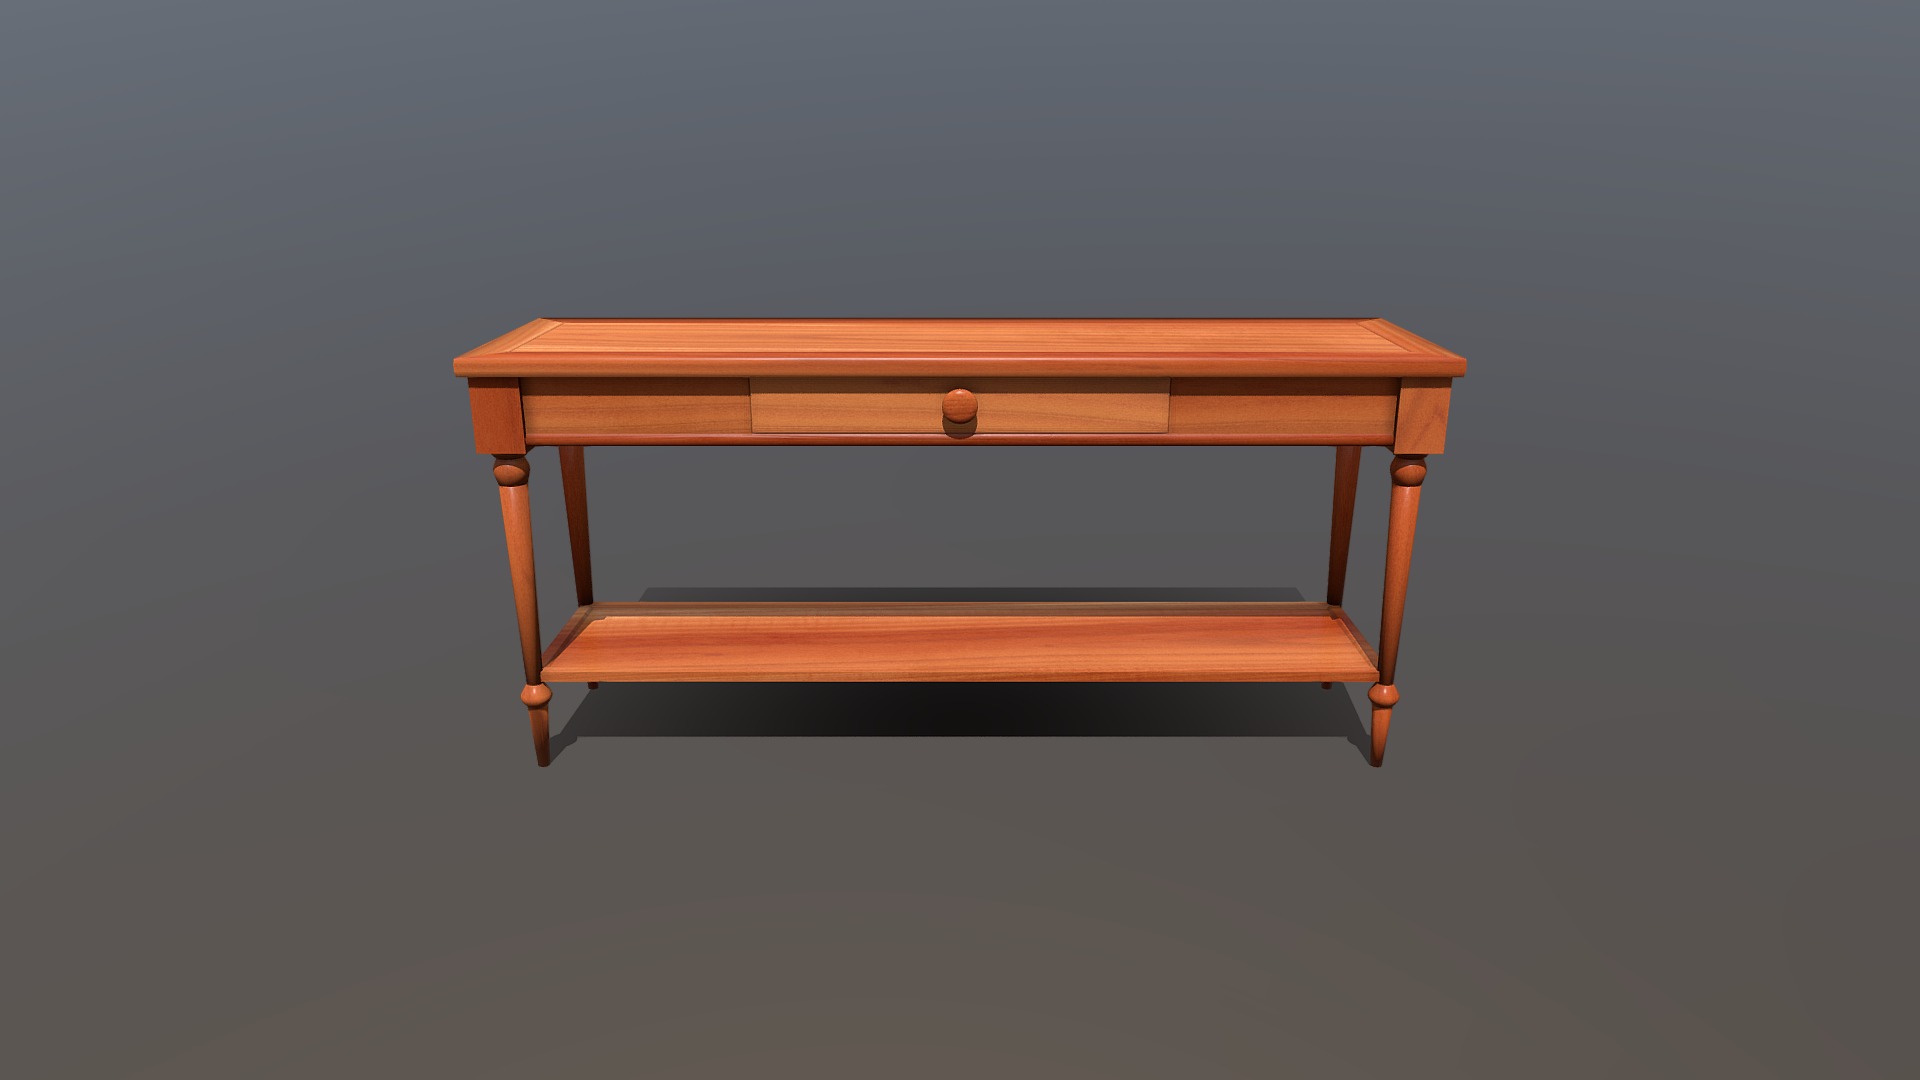 3D model Wood Sofa Table - This is a 3D model of the Wood Sofa Table. The 3D model is about a wooden table with a chair.